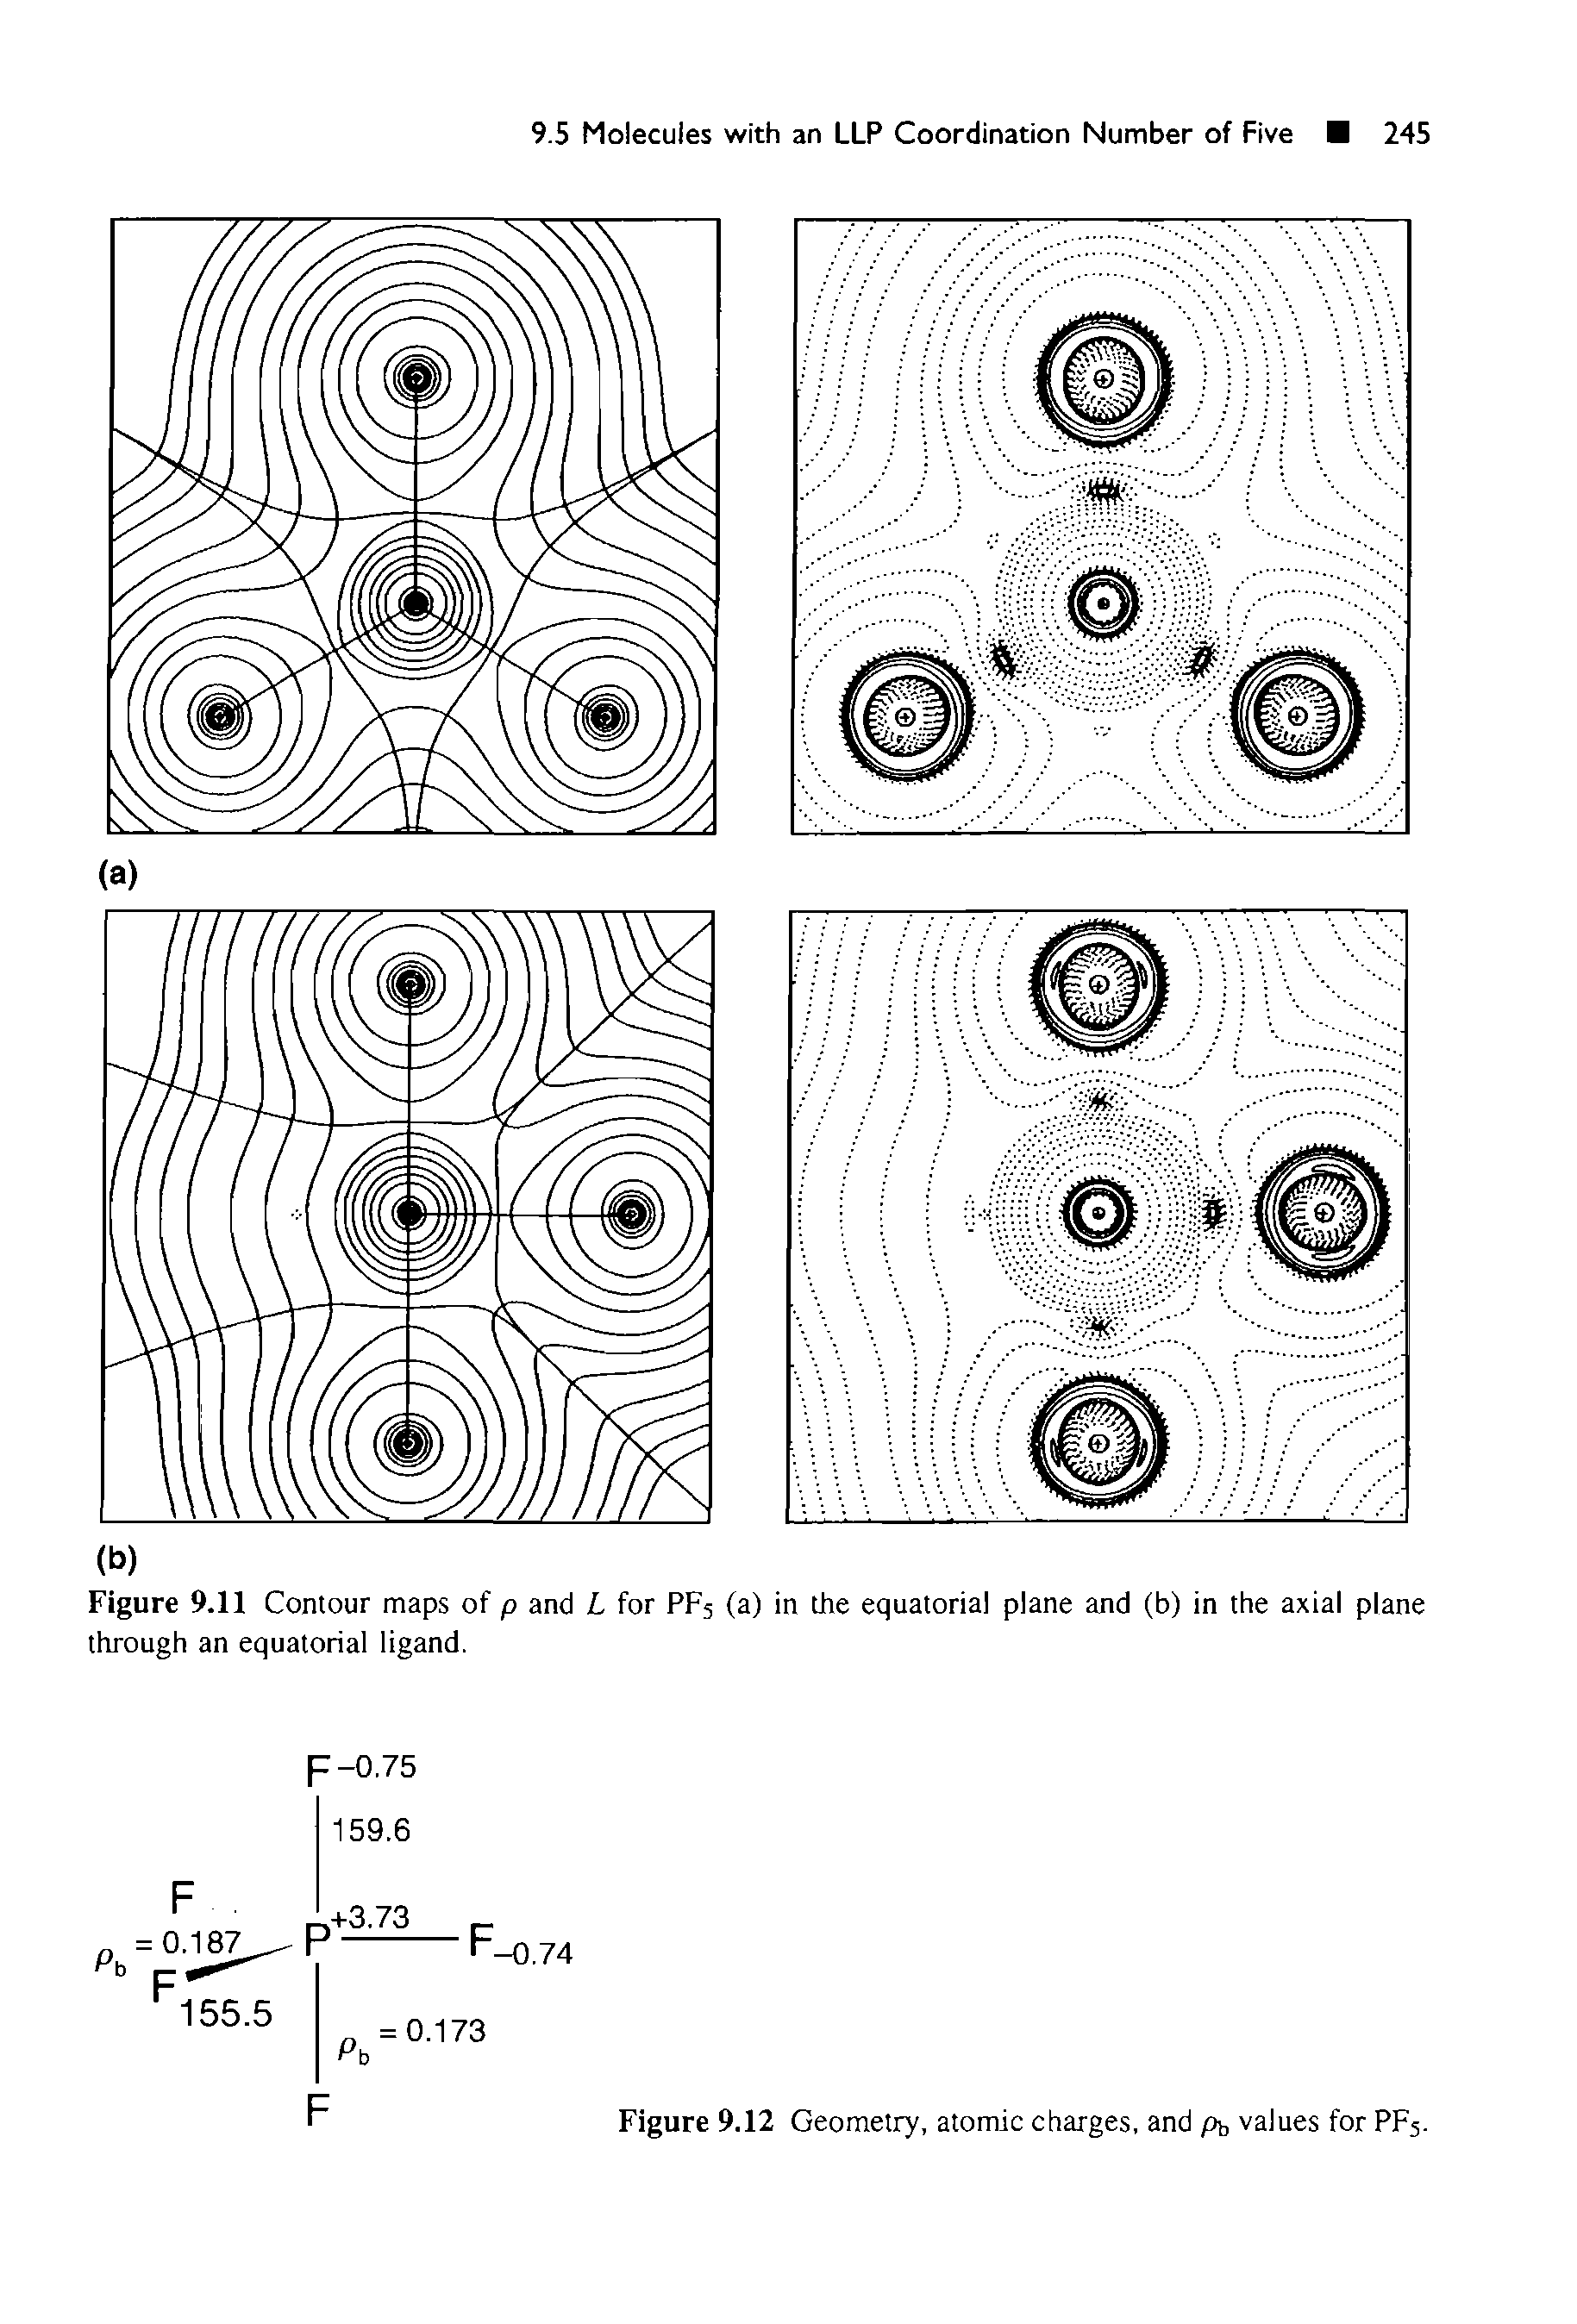 Figure 9.11 Contour maps of p and L for PF5 (a) in the equatorial plane and (b) in the axial plane through an equatorial ligand.